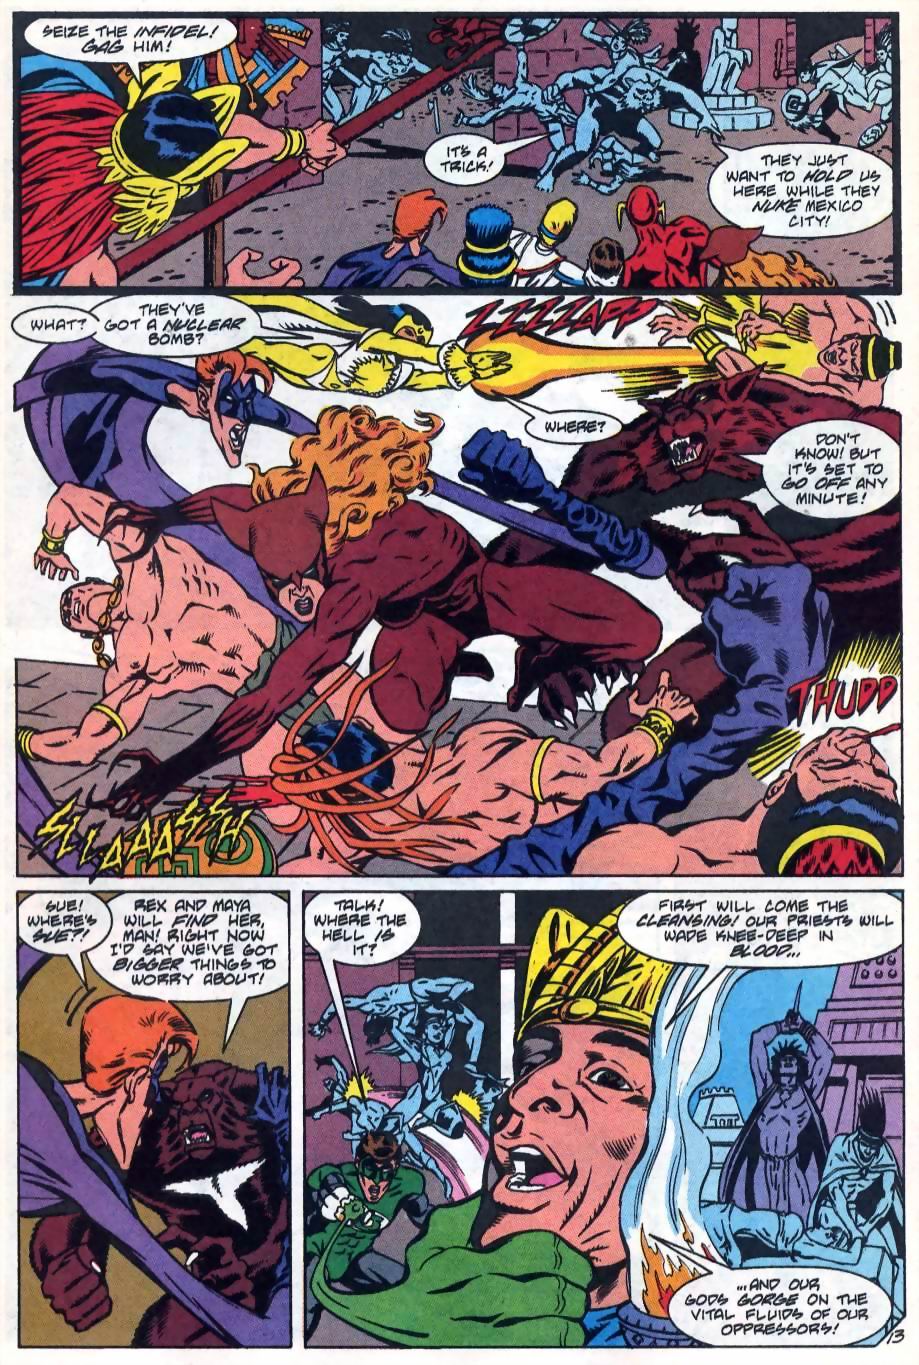 Justice League International (1993) 51 Page 13